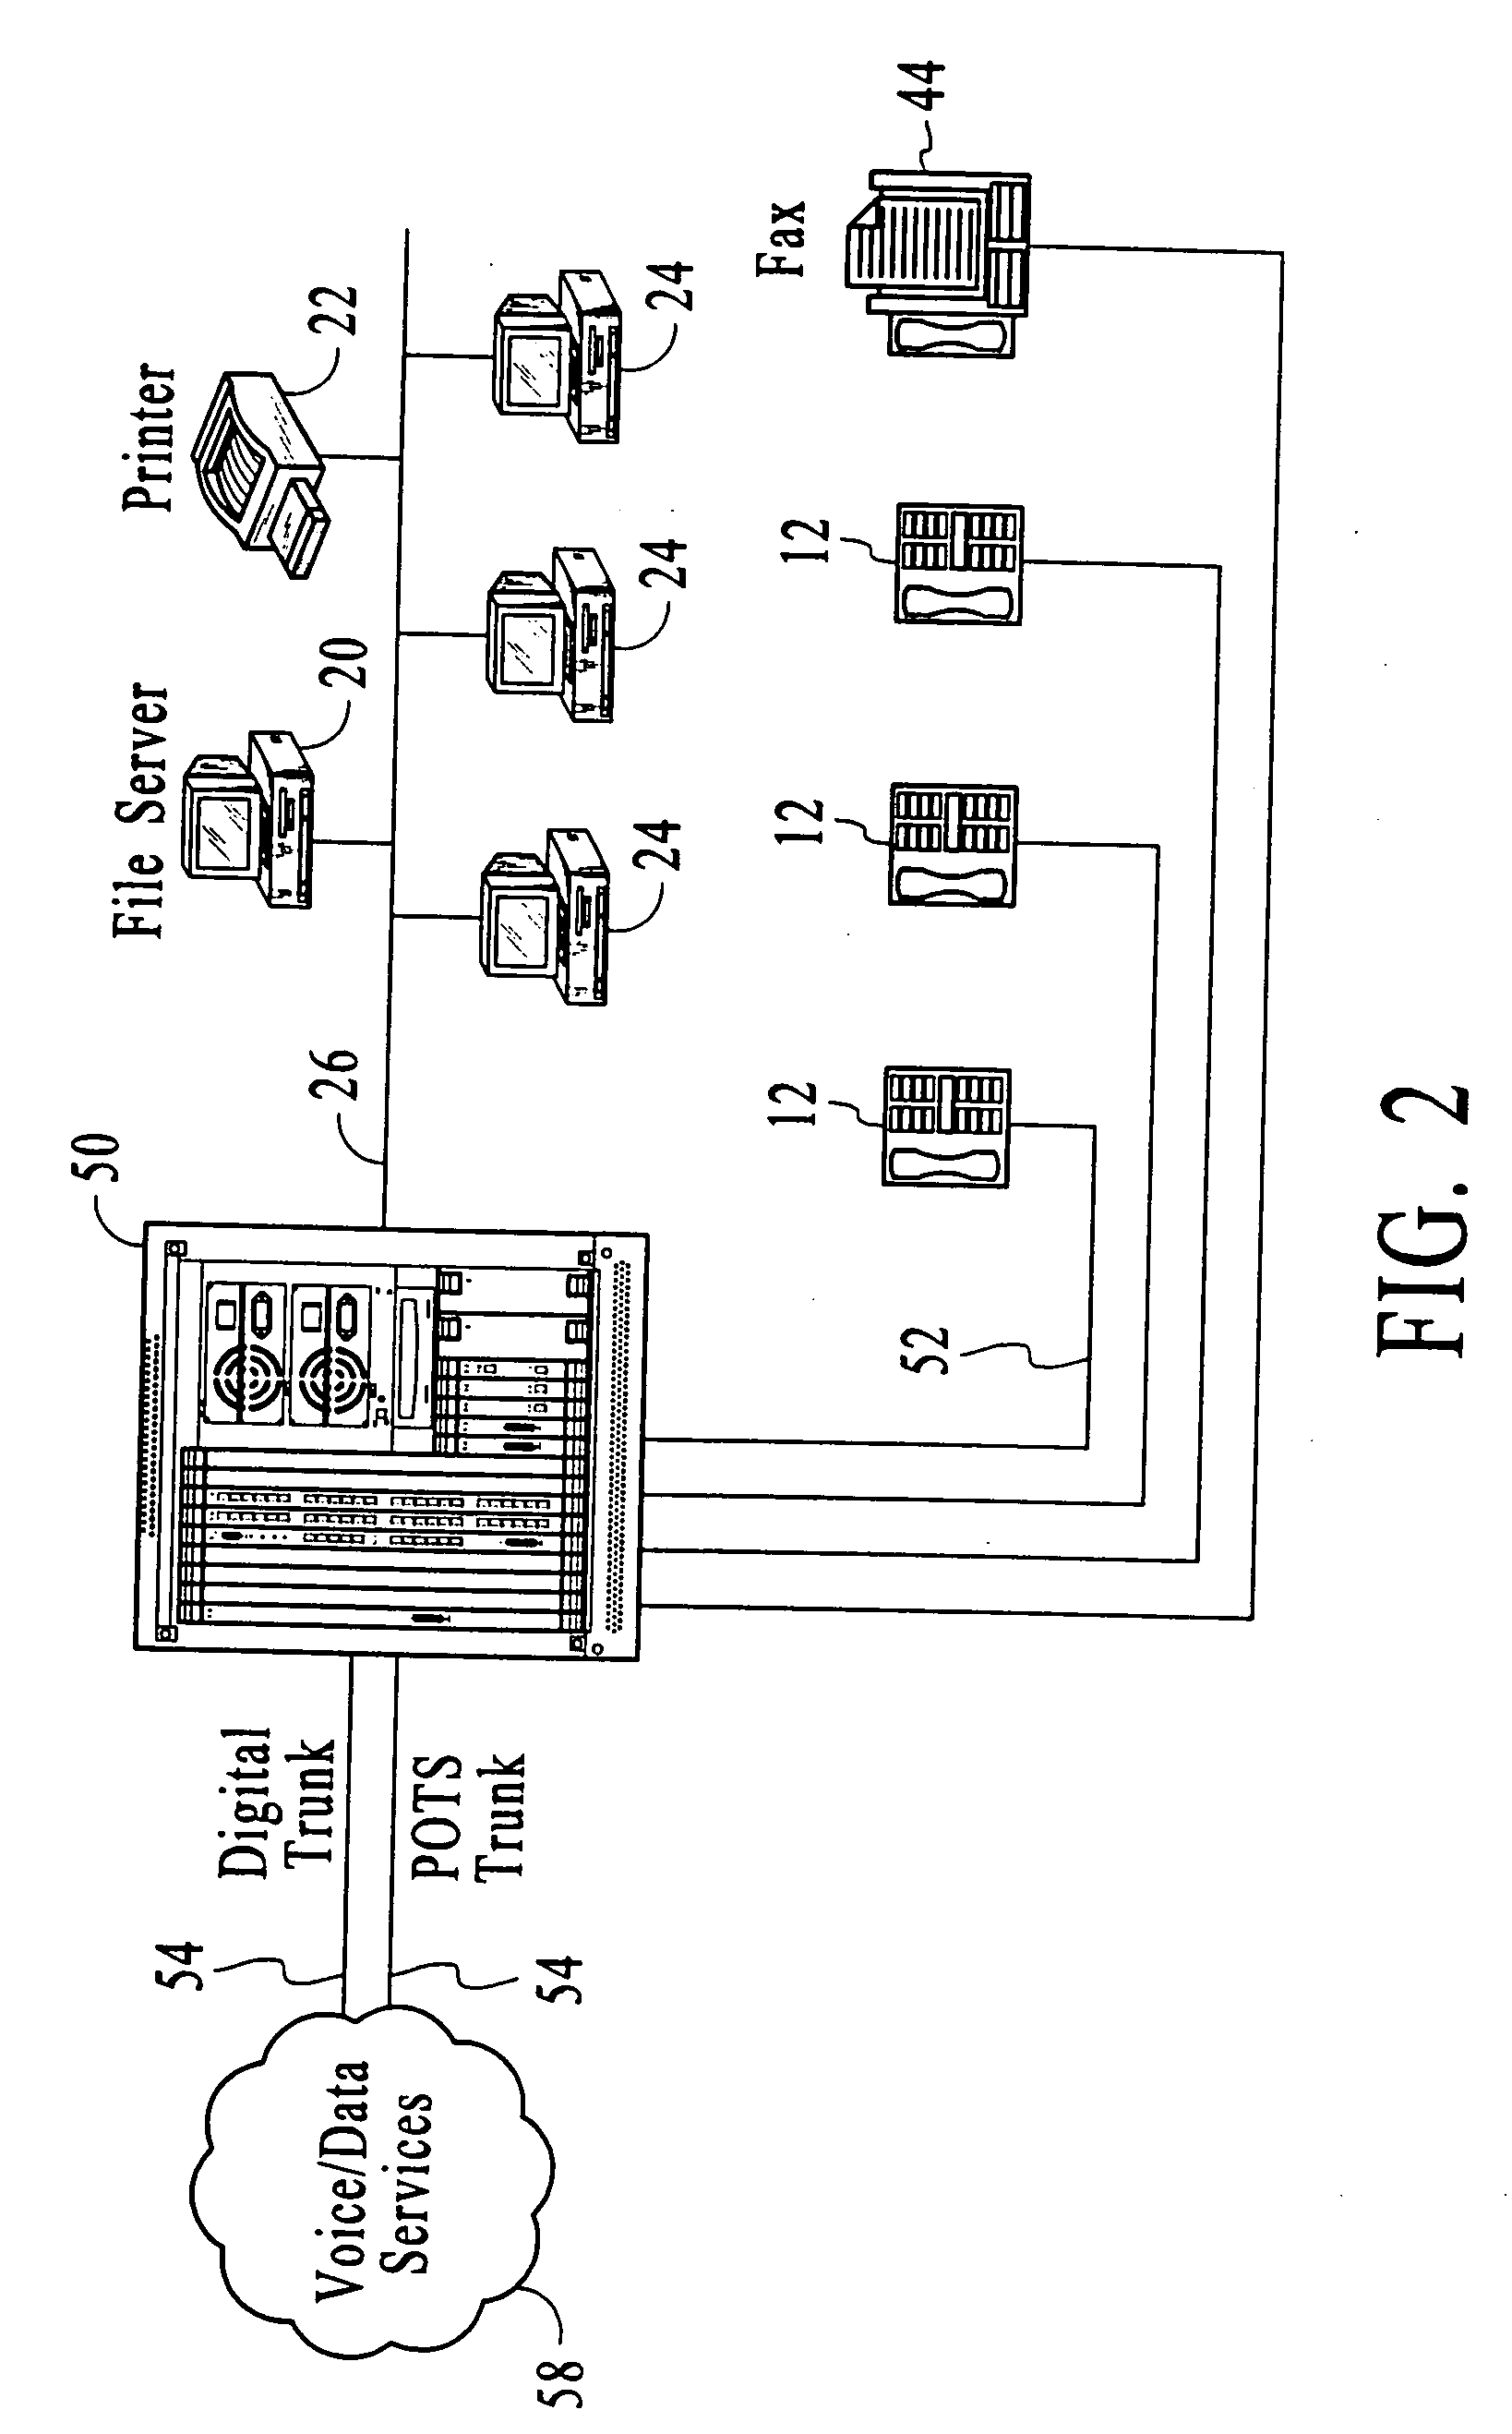 Systems and methods for multiple mode voice and data communications using intelligenty bridged TDM and packet buses and methods for performing telephony and data functions using the same